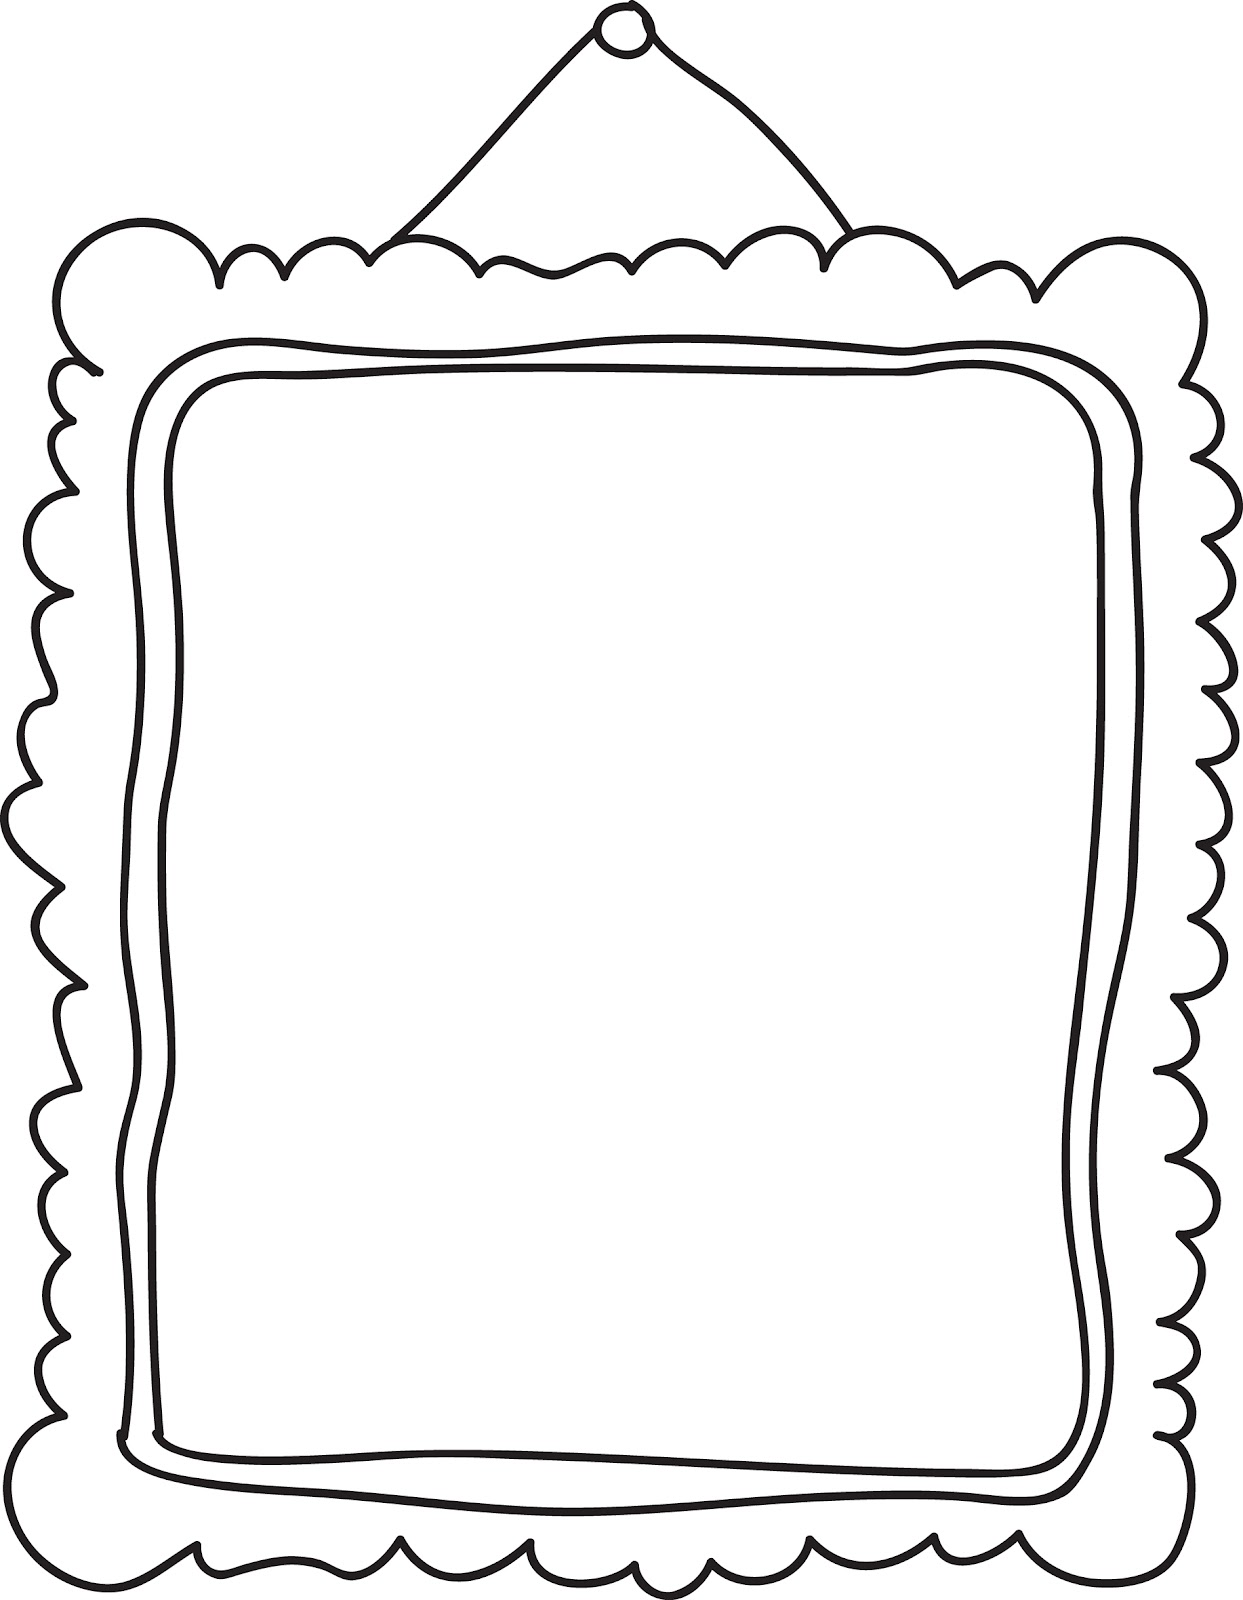 free clipart picture frames - photo #14